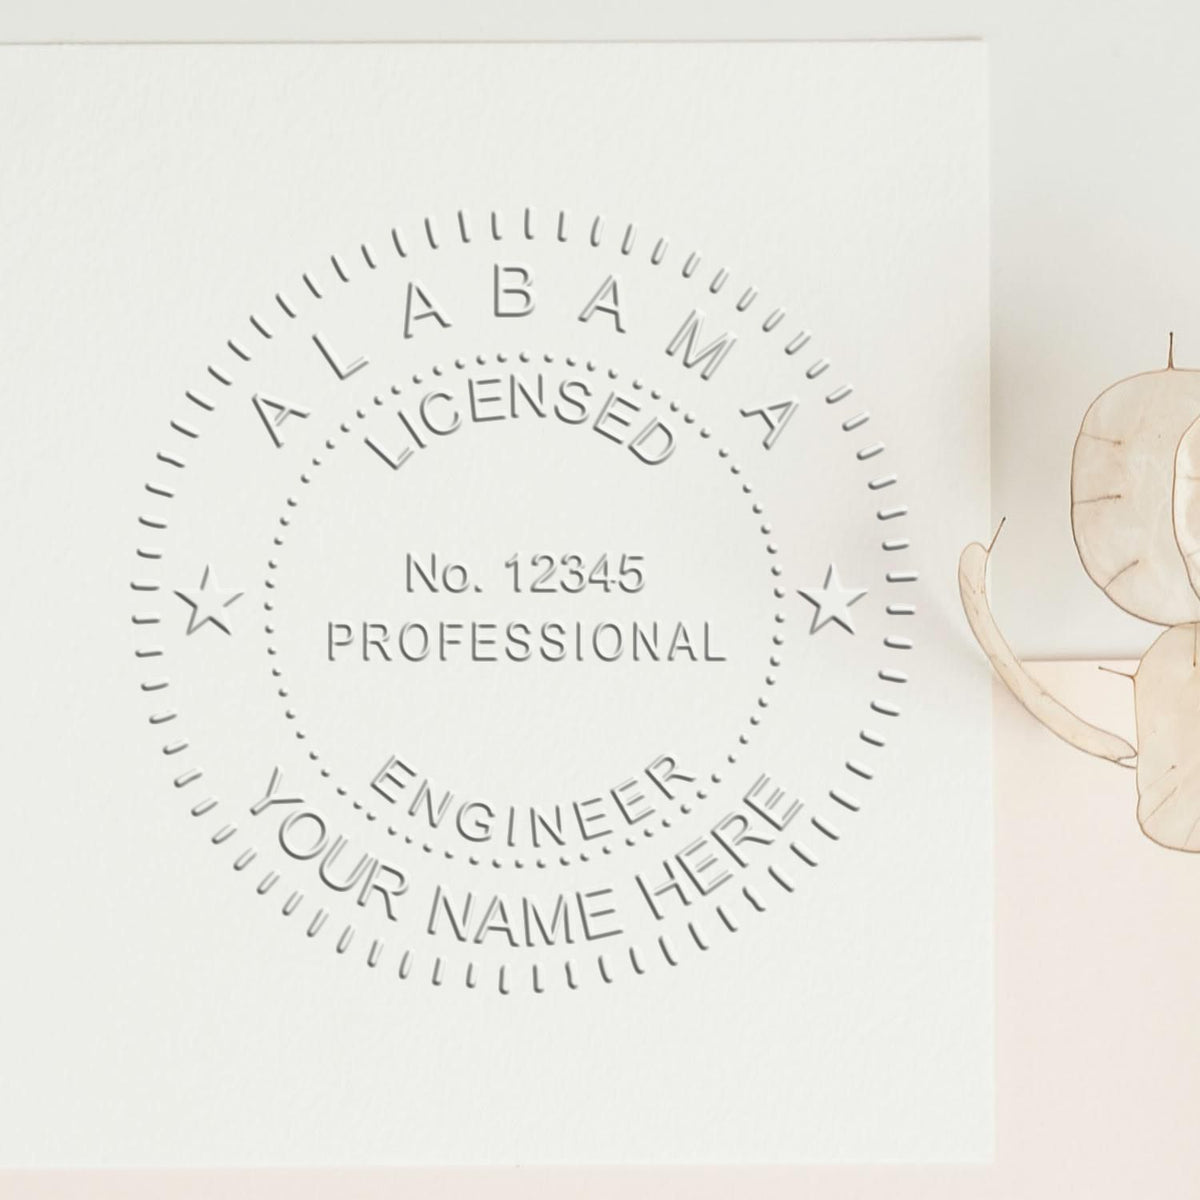 The Gift Alabama Engineer Seal stamp impression comes to life with a crisp, detailed image stamped on paper - showcasing true professional quality.